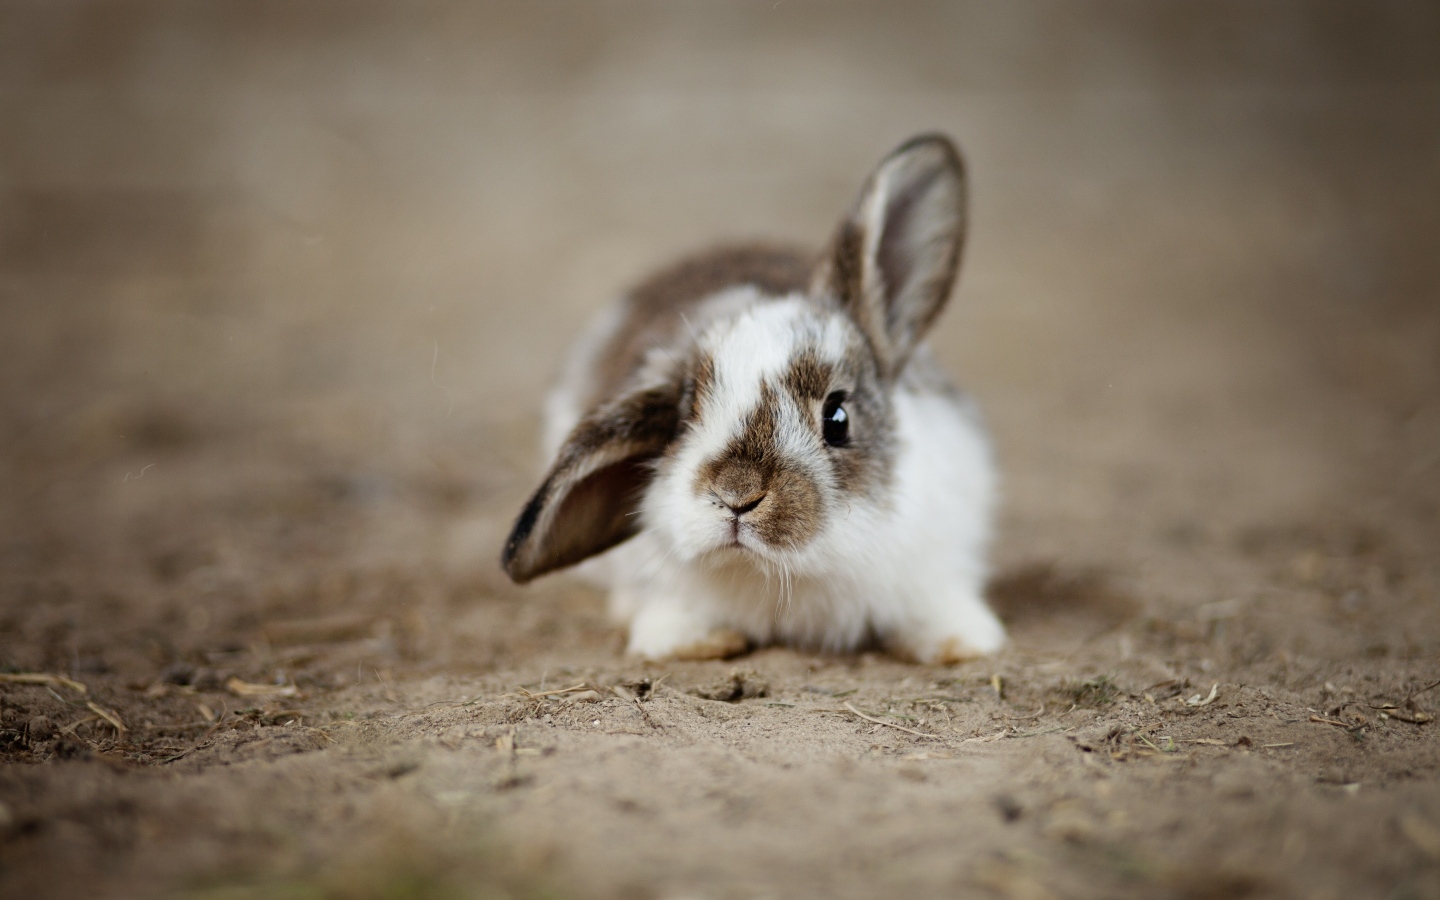 Cute little domestic rabbit on the sand